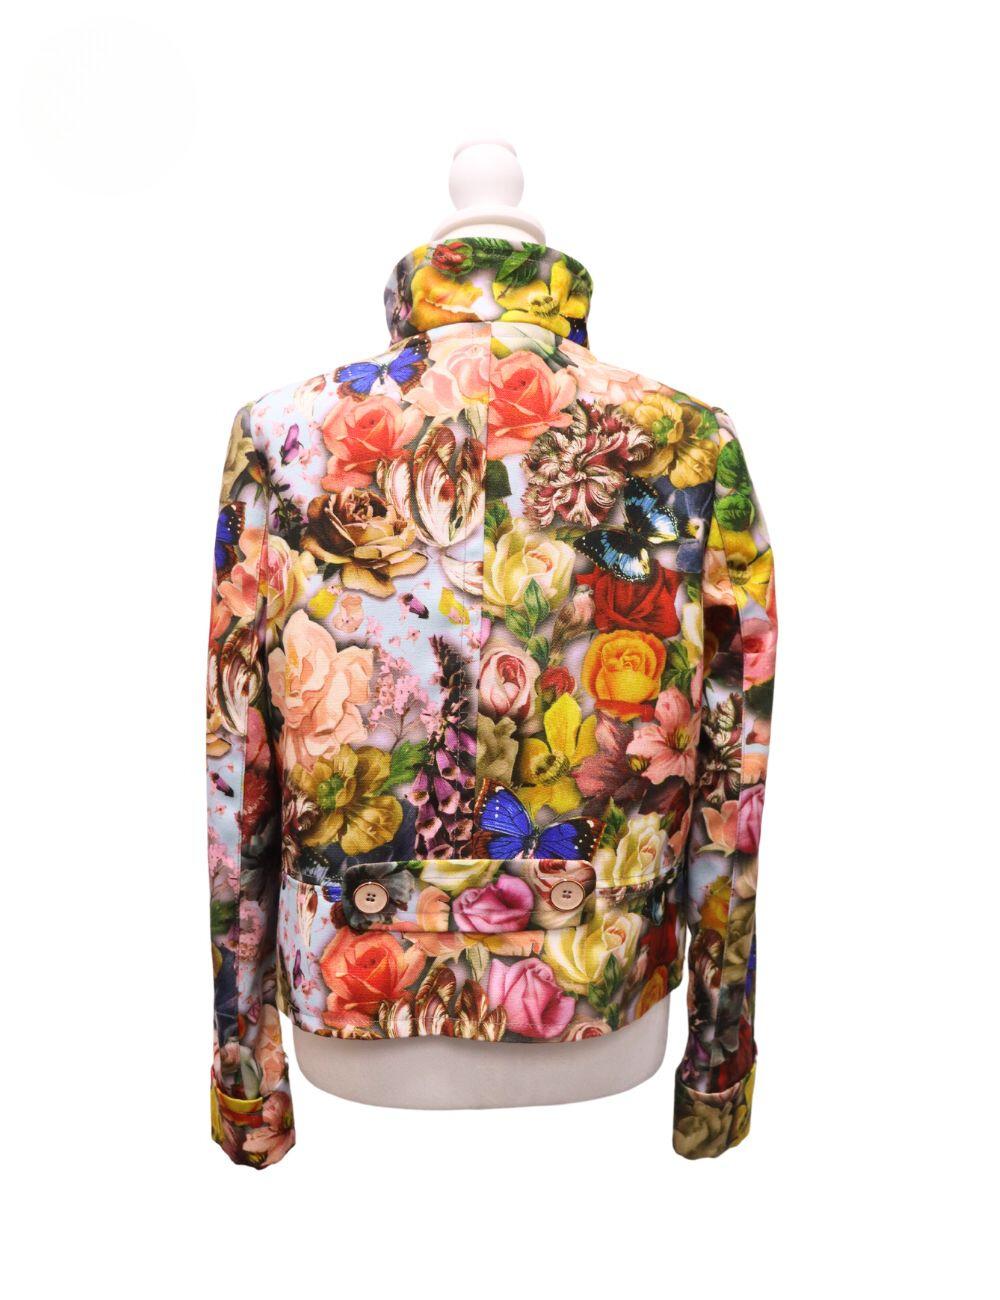 Ted Baker Lornah Floral Jacket, Features long sleeves, dual front welt pockets, regular fit, front button closures.

Material: 100% Polyester
Size: EU 40 / 3
Bust: 94cm
Waist: 76cm
Hip: 103cm
Condition: Good